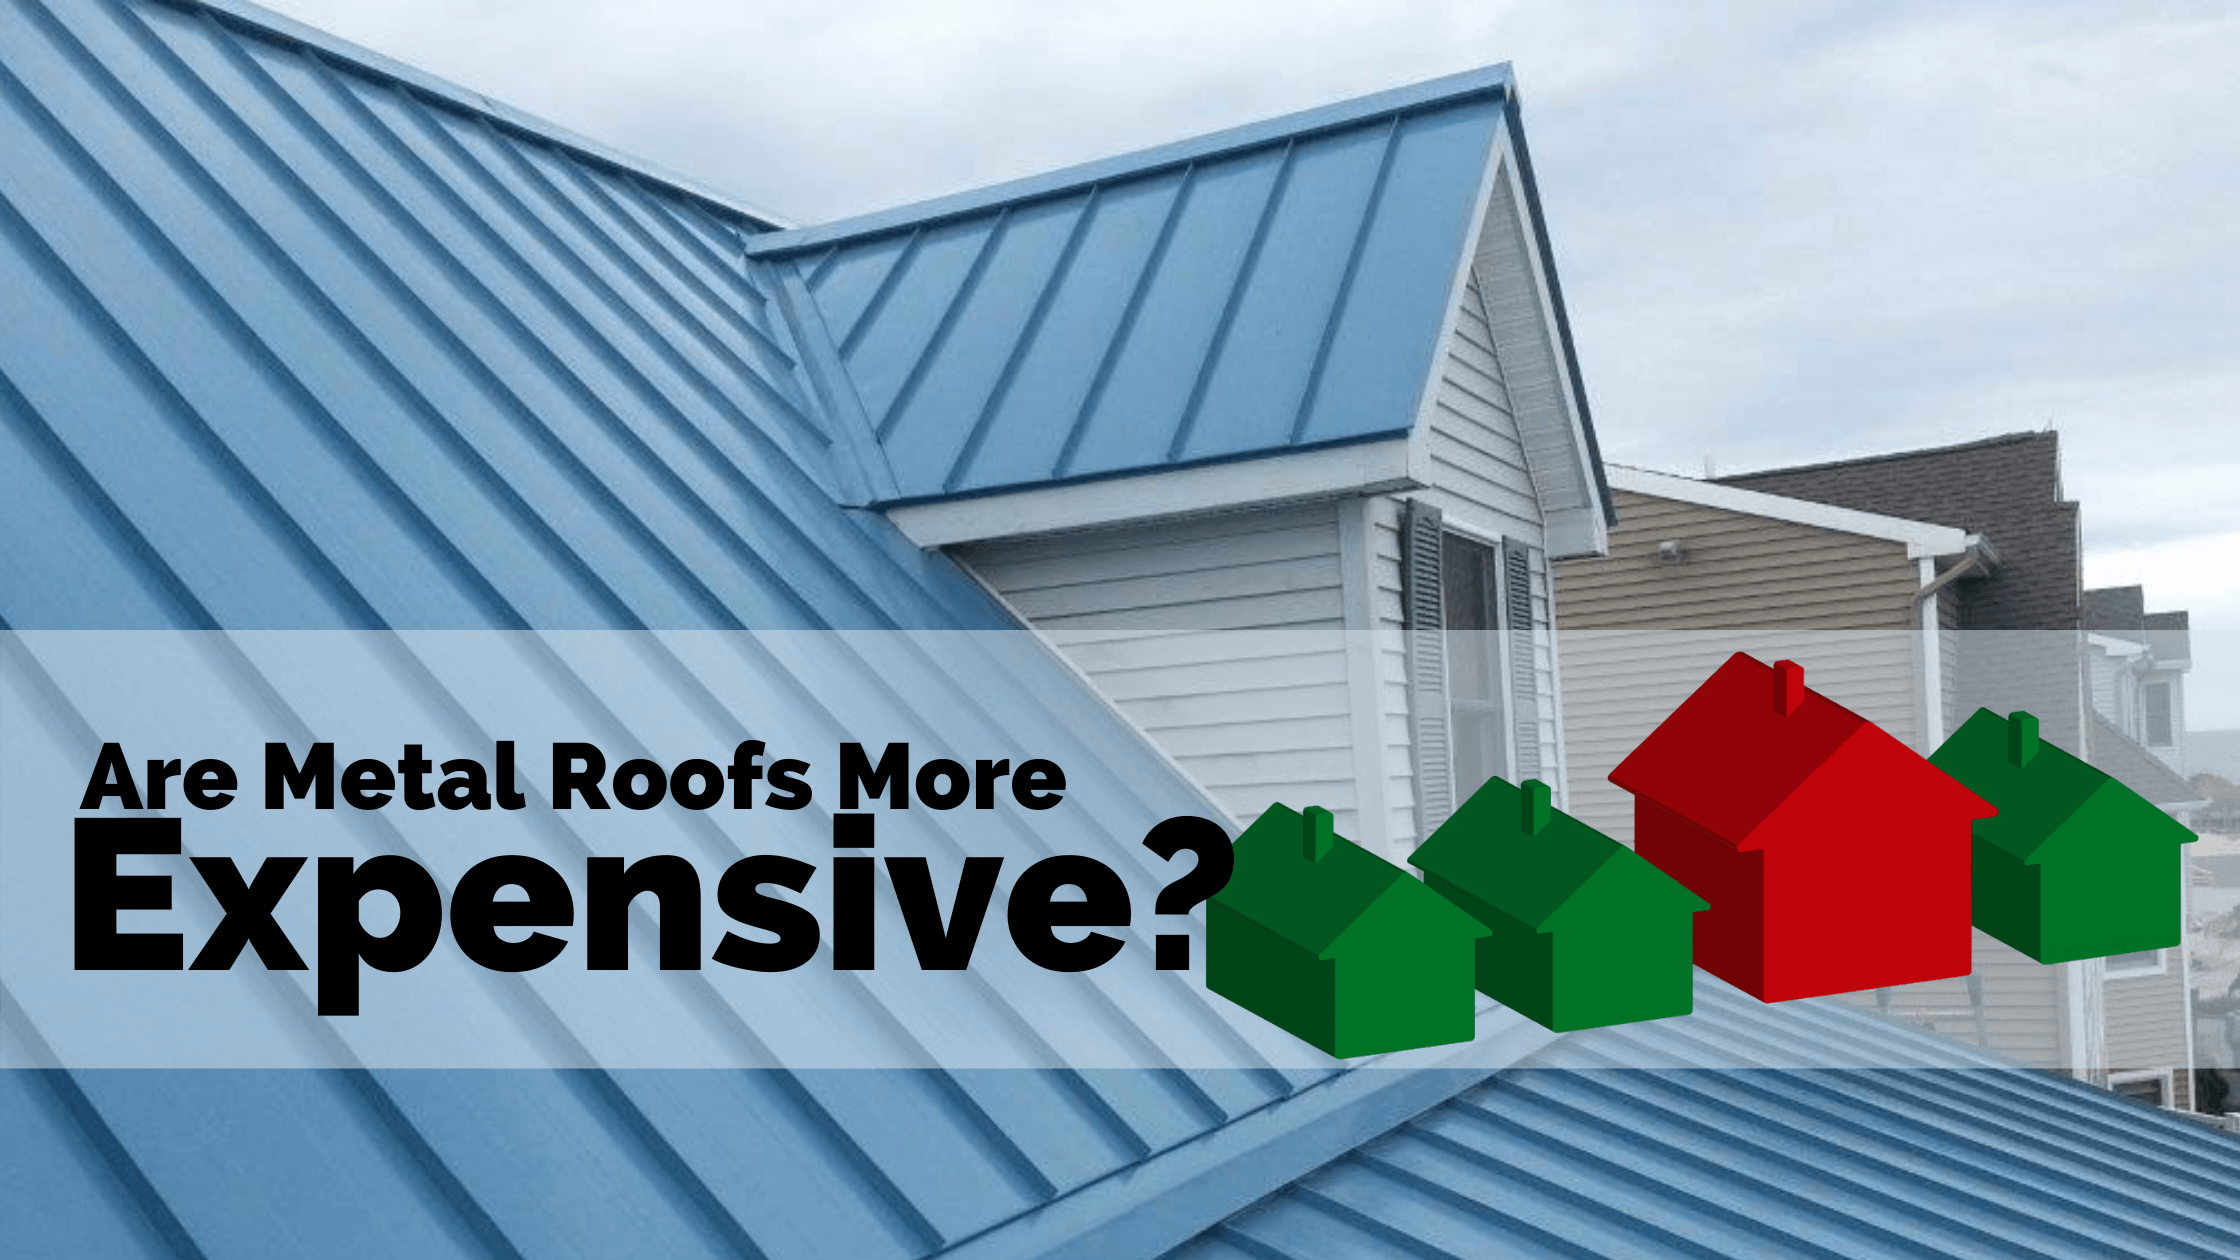 Are_Metal_Roofs More Expensive